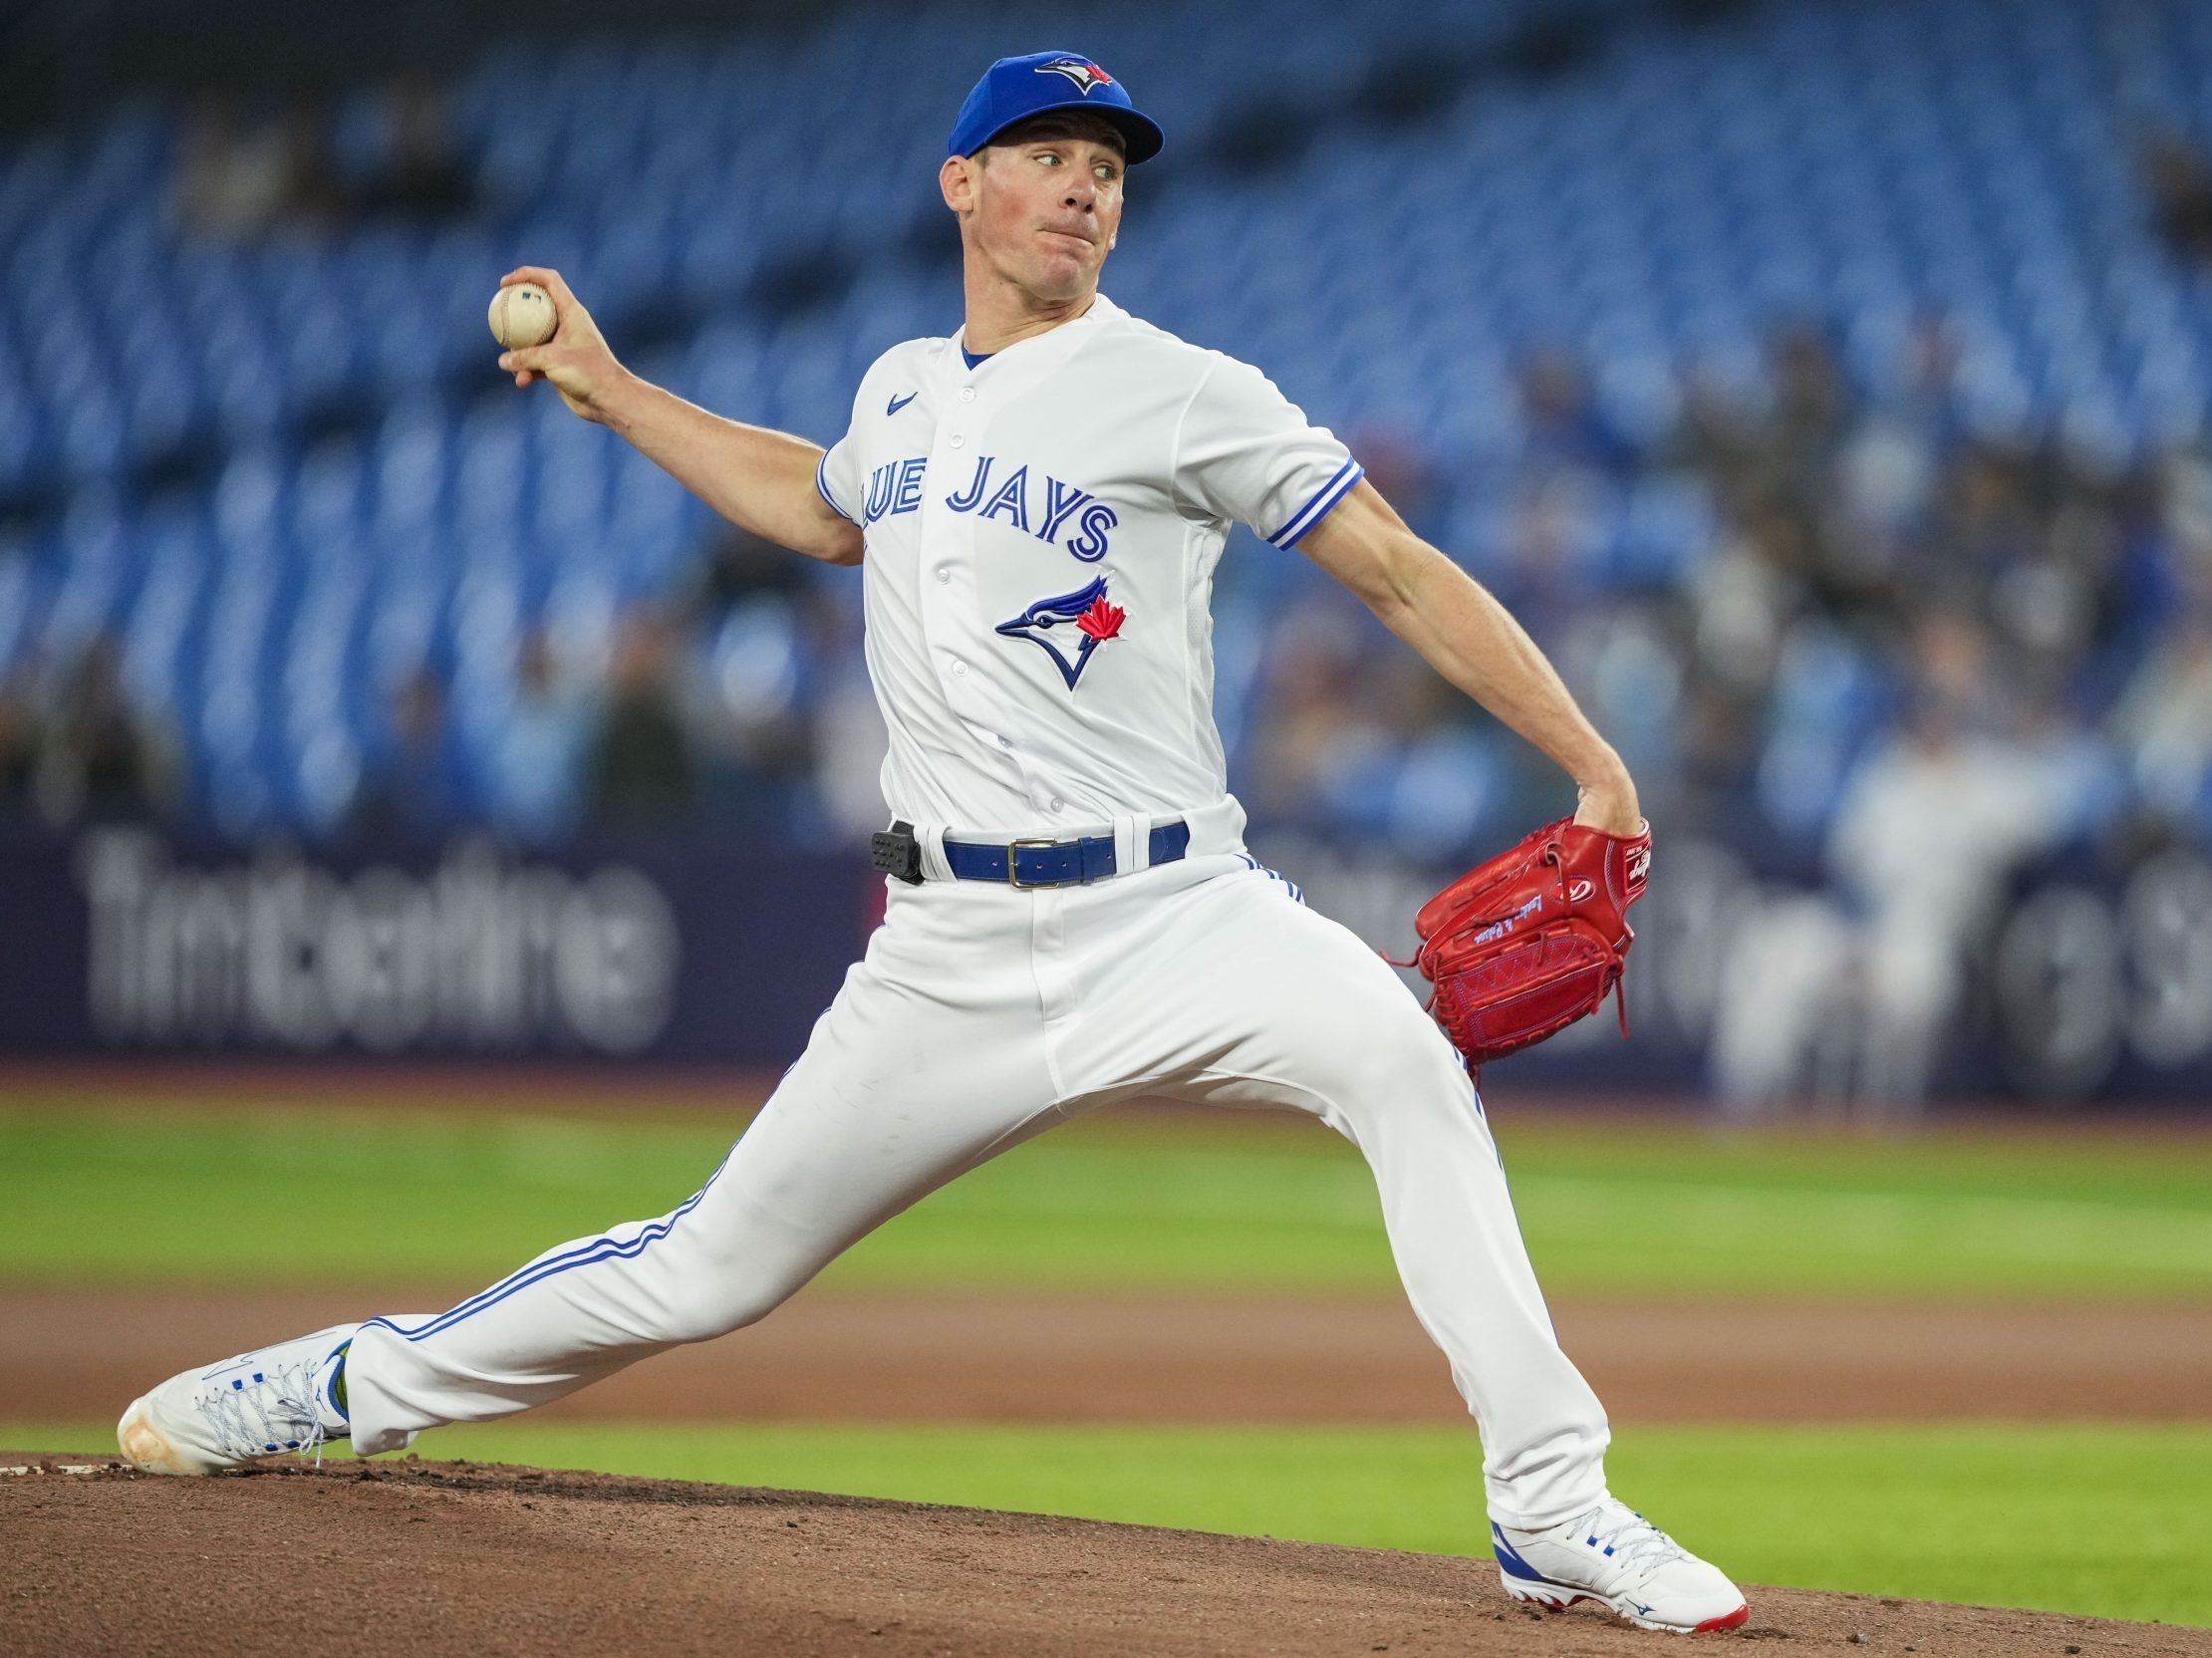 chris bassitt tosses gem as blue jays combine pitching and defence to subdue astros